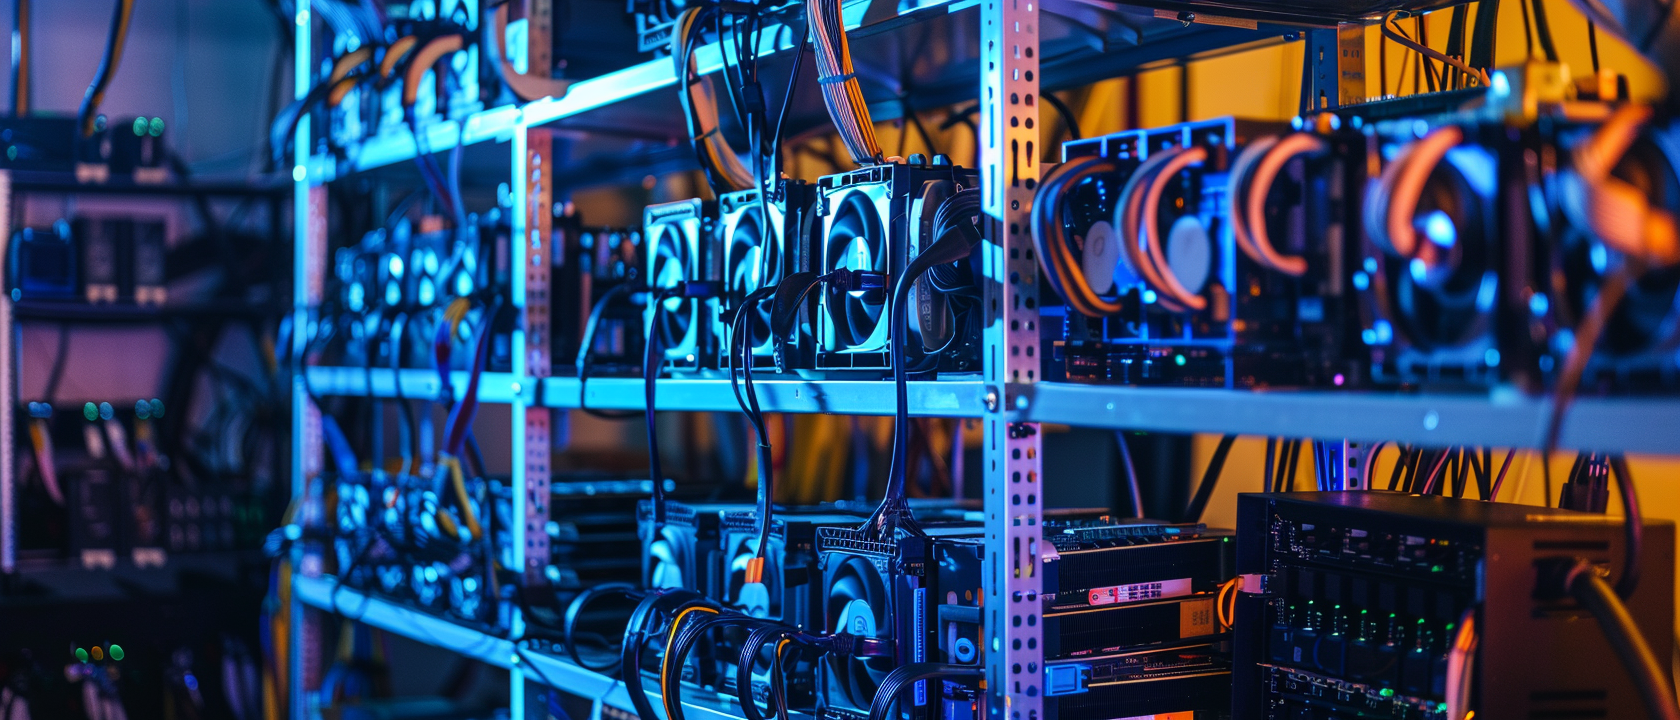 CleanSpark’s Hashrate Jumps to 20 EH/s as Network Hashrate Falls